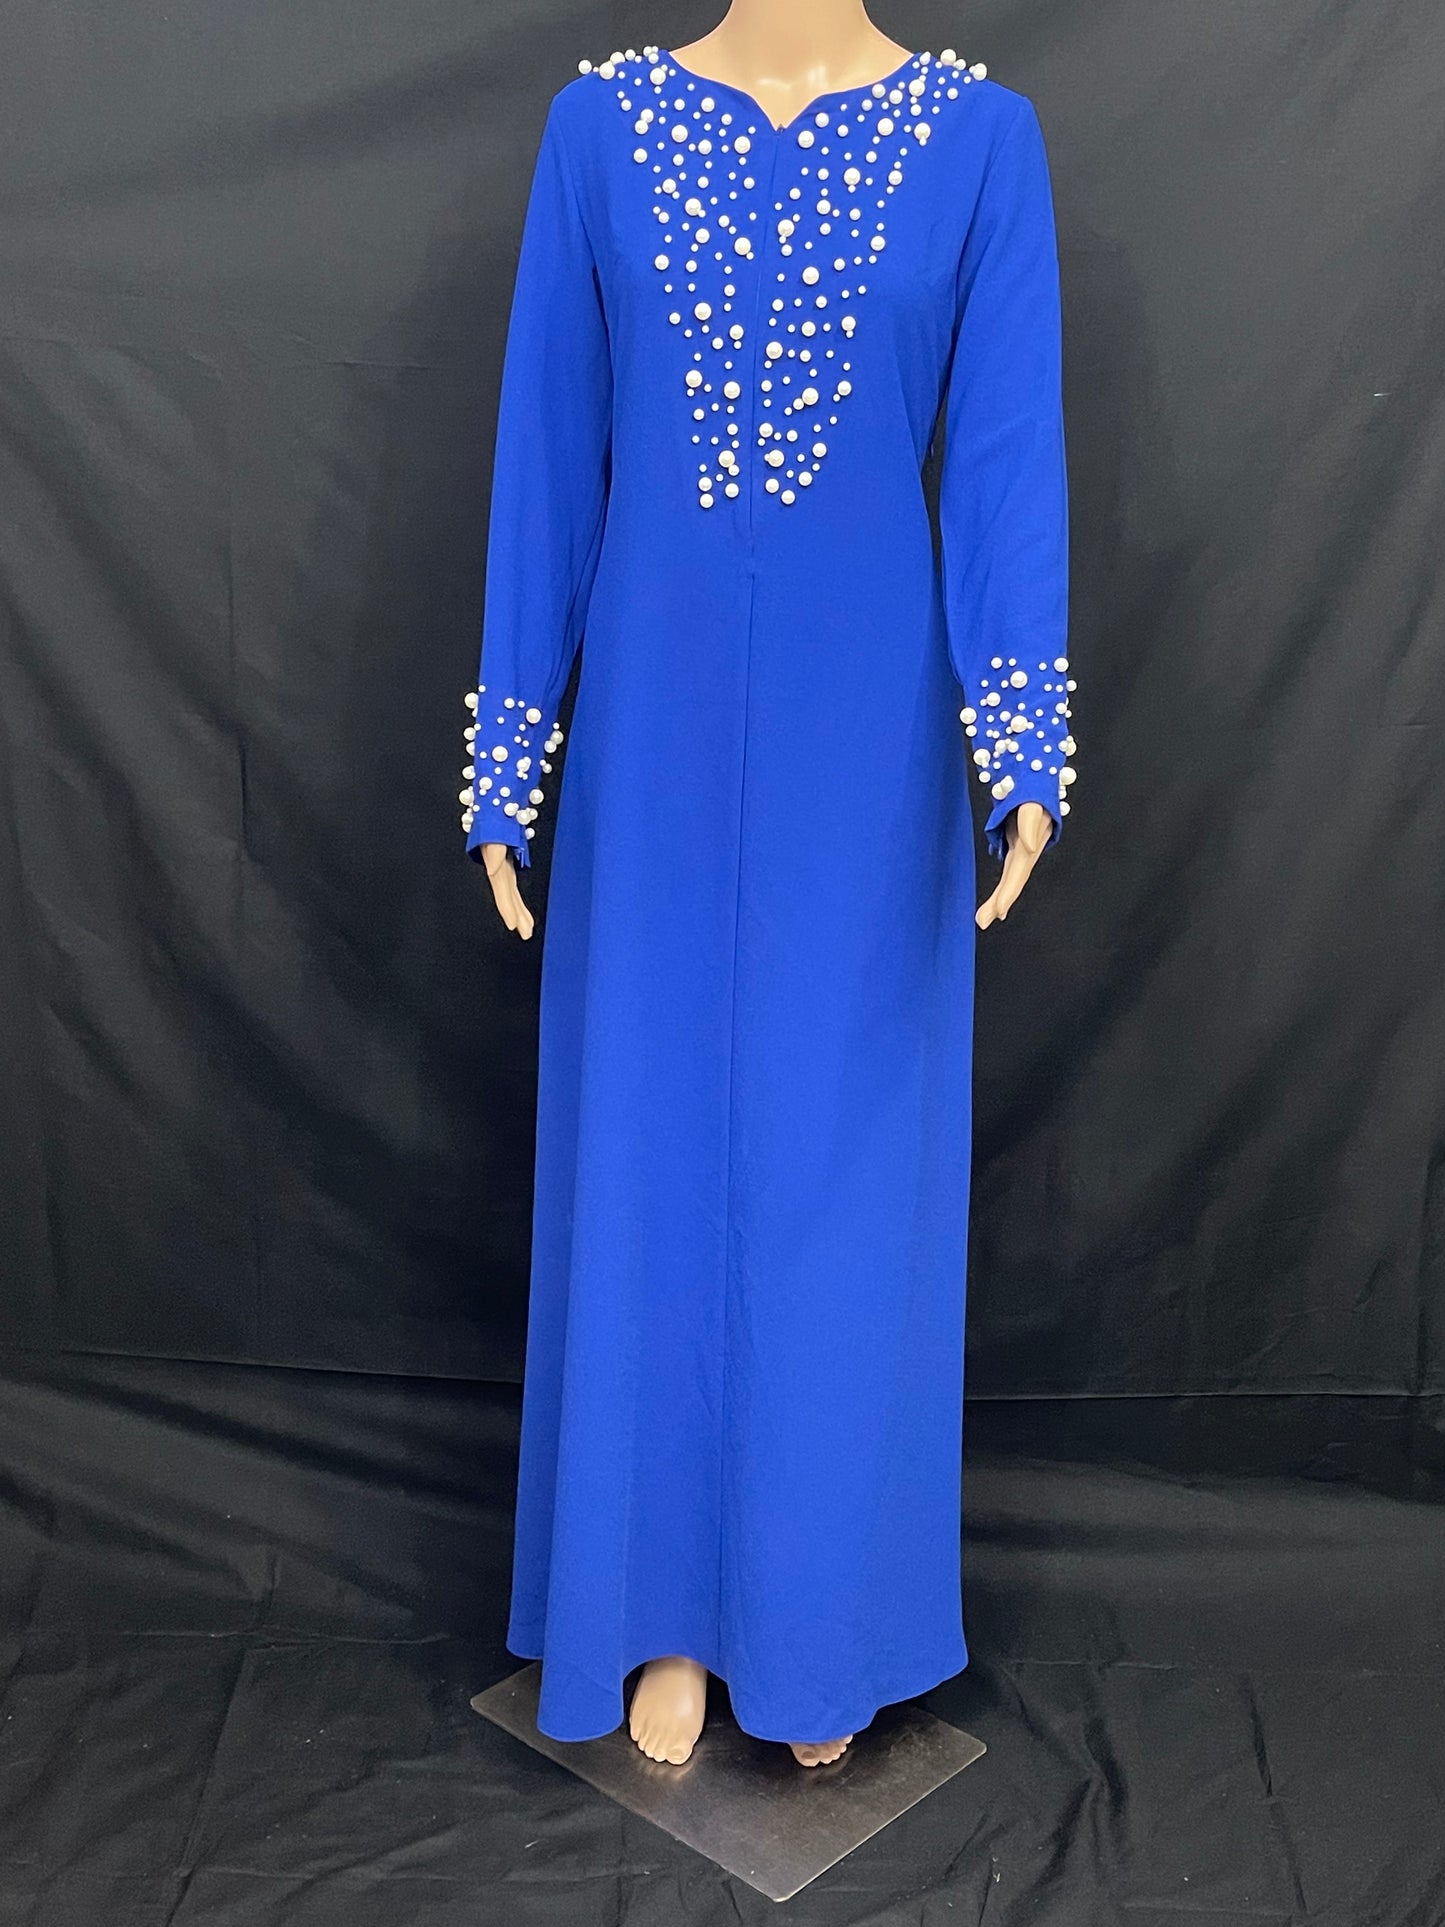 Elegant summer modest dress made of thin soft crepe fabric - Asiyah's Collection